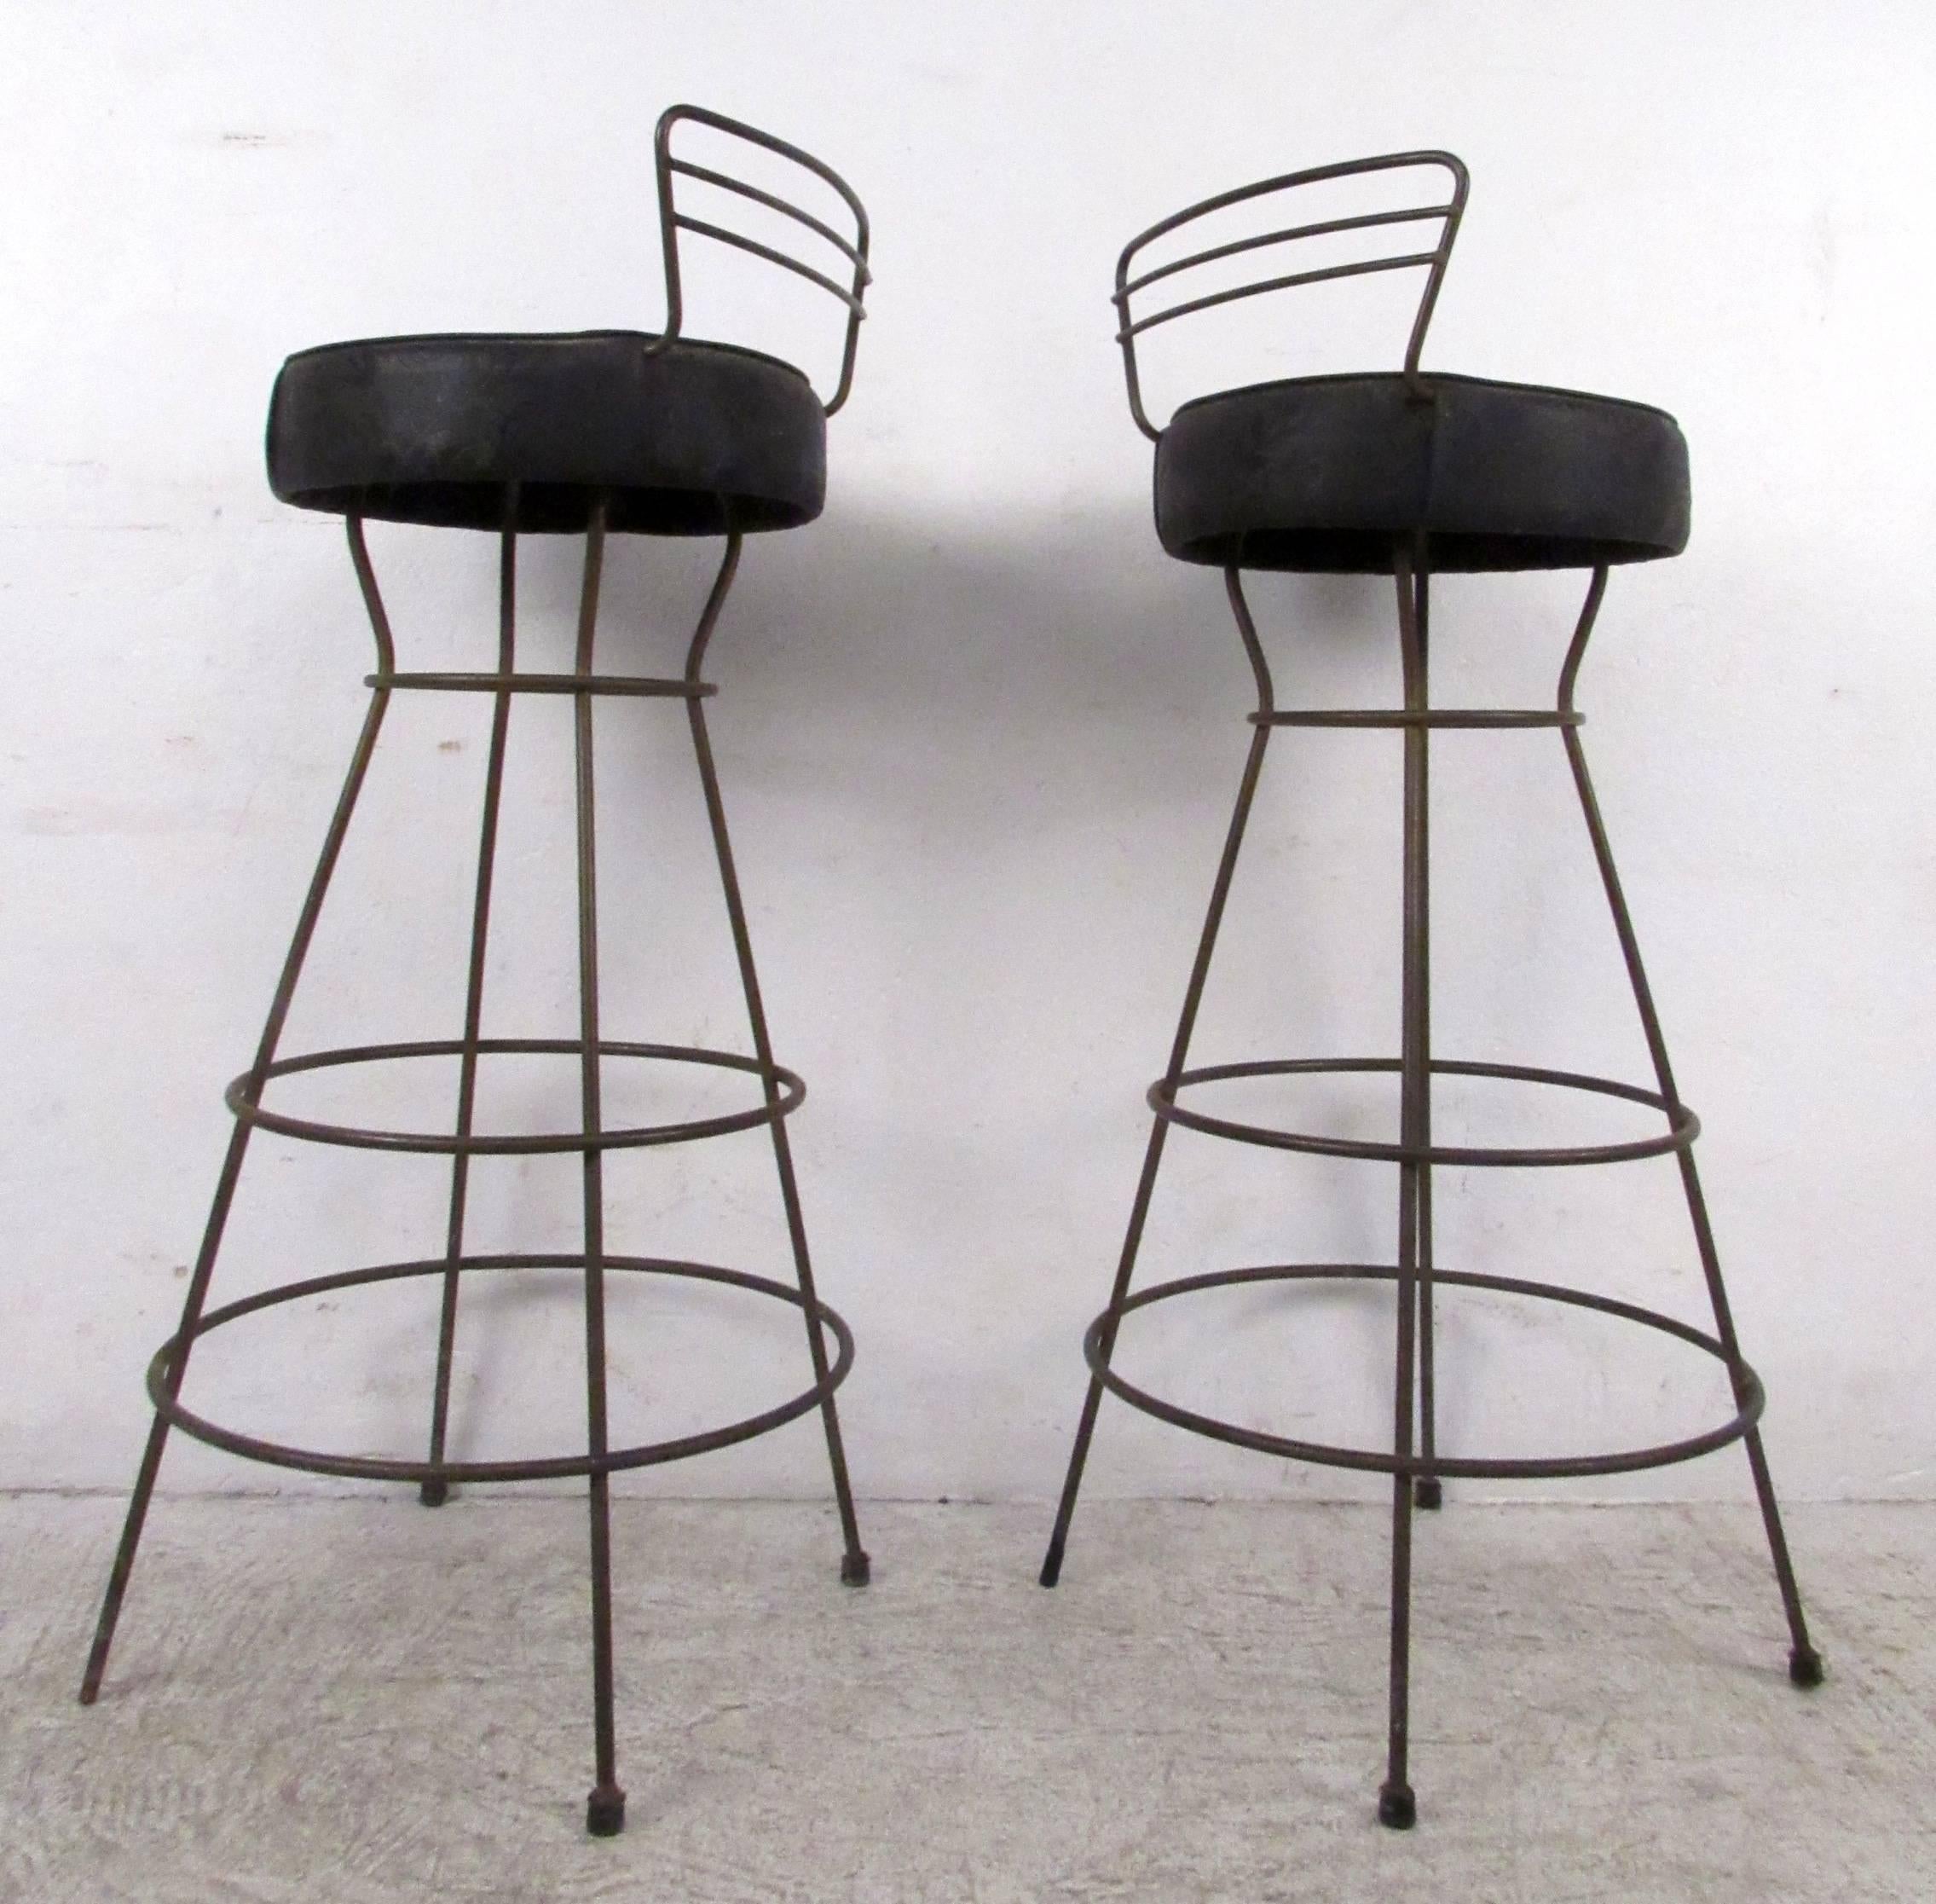 Set of vintage modern stools featuring sculpted iron bases and seat backs with upholstered vinyl seats.

Please confirm item location NY or NJ with dealer.